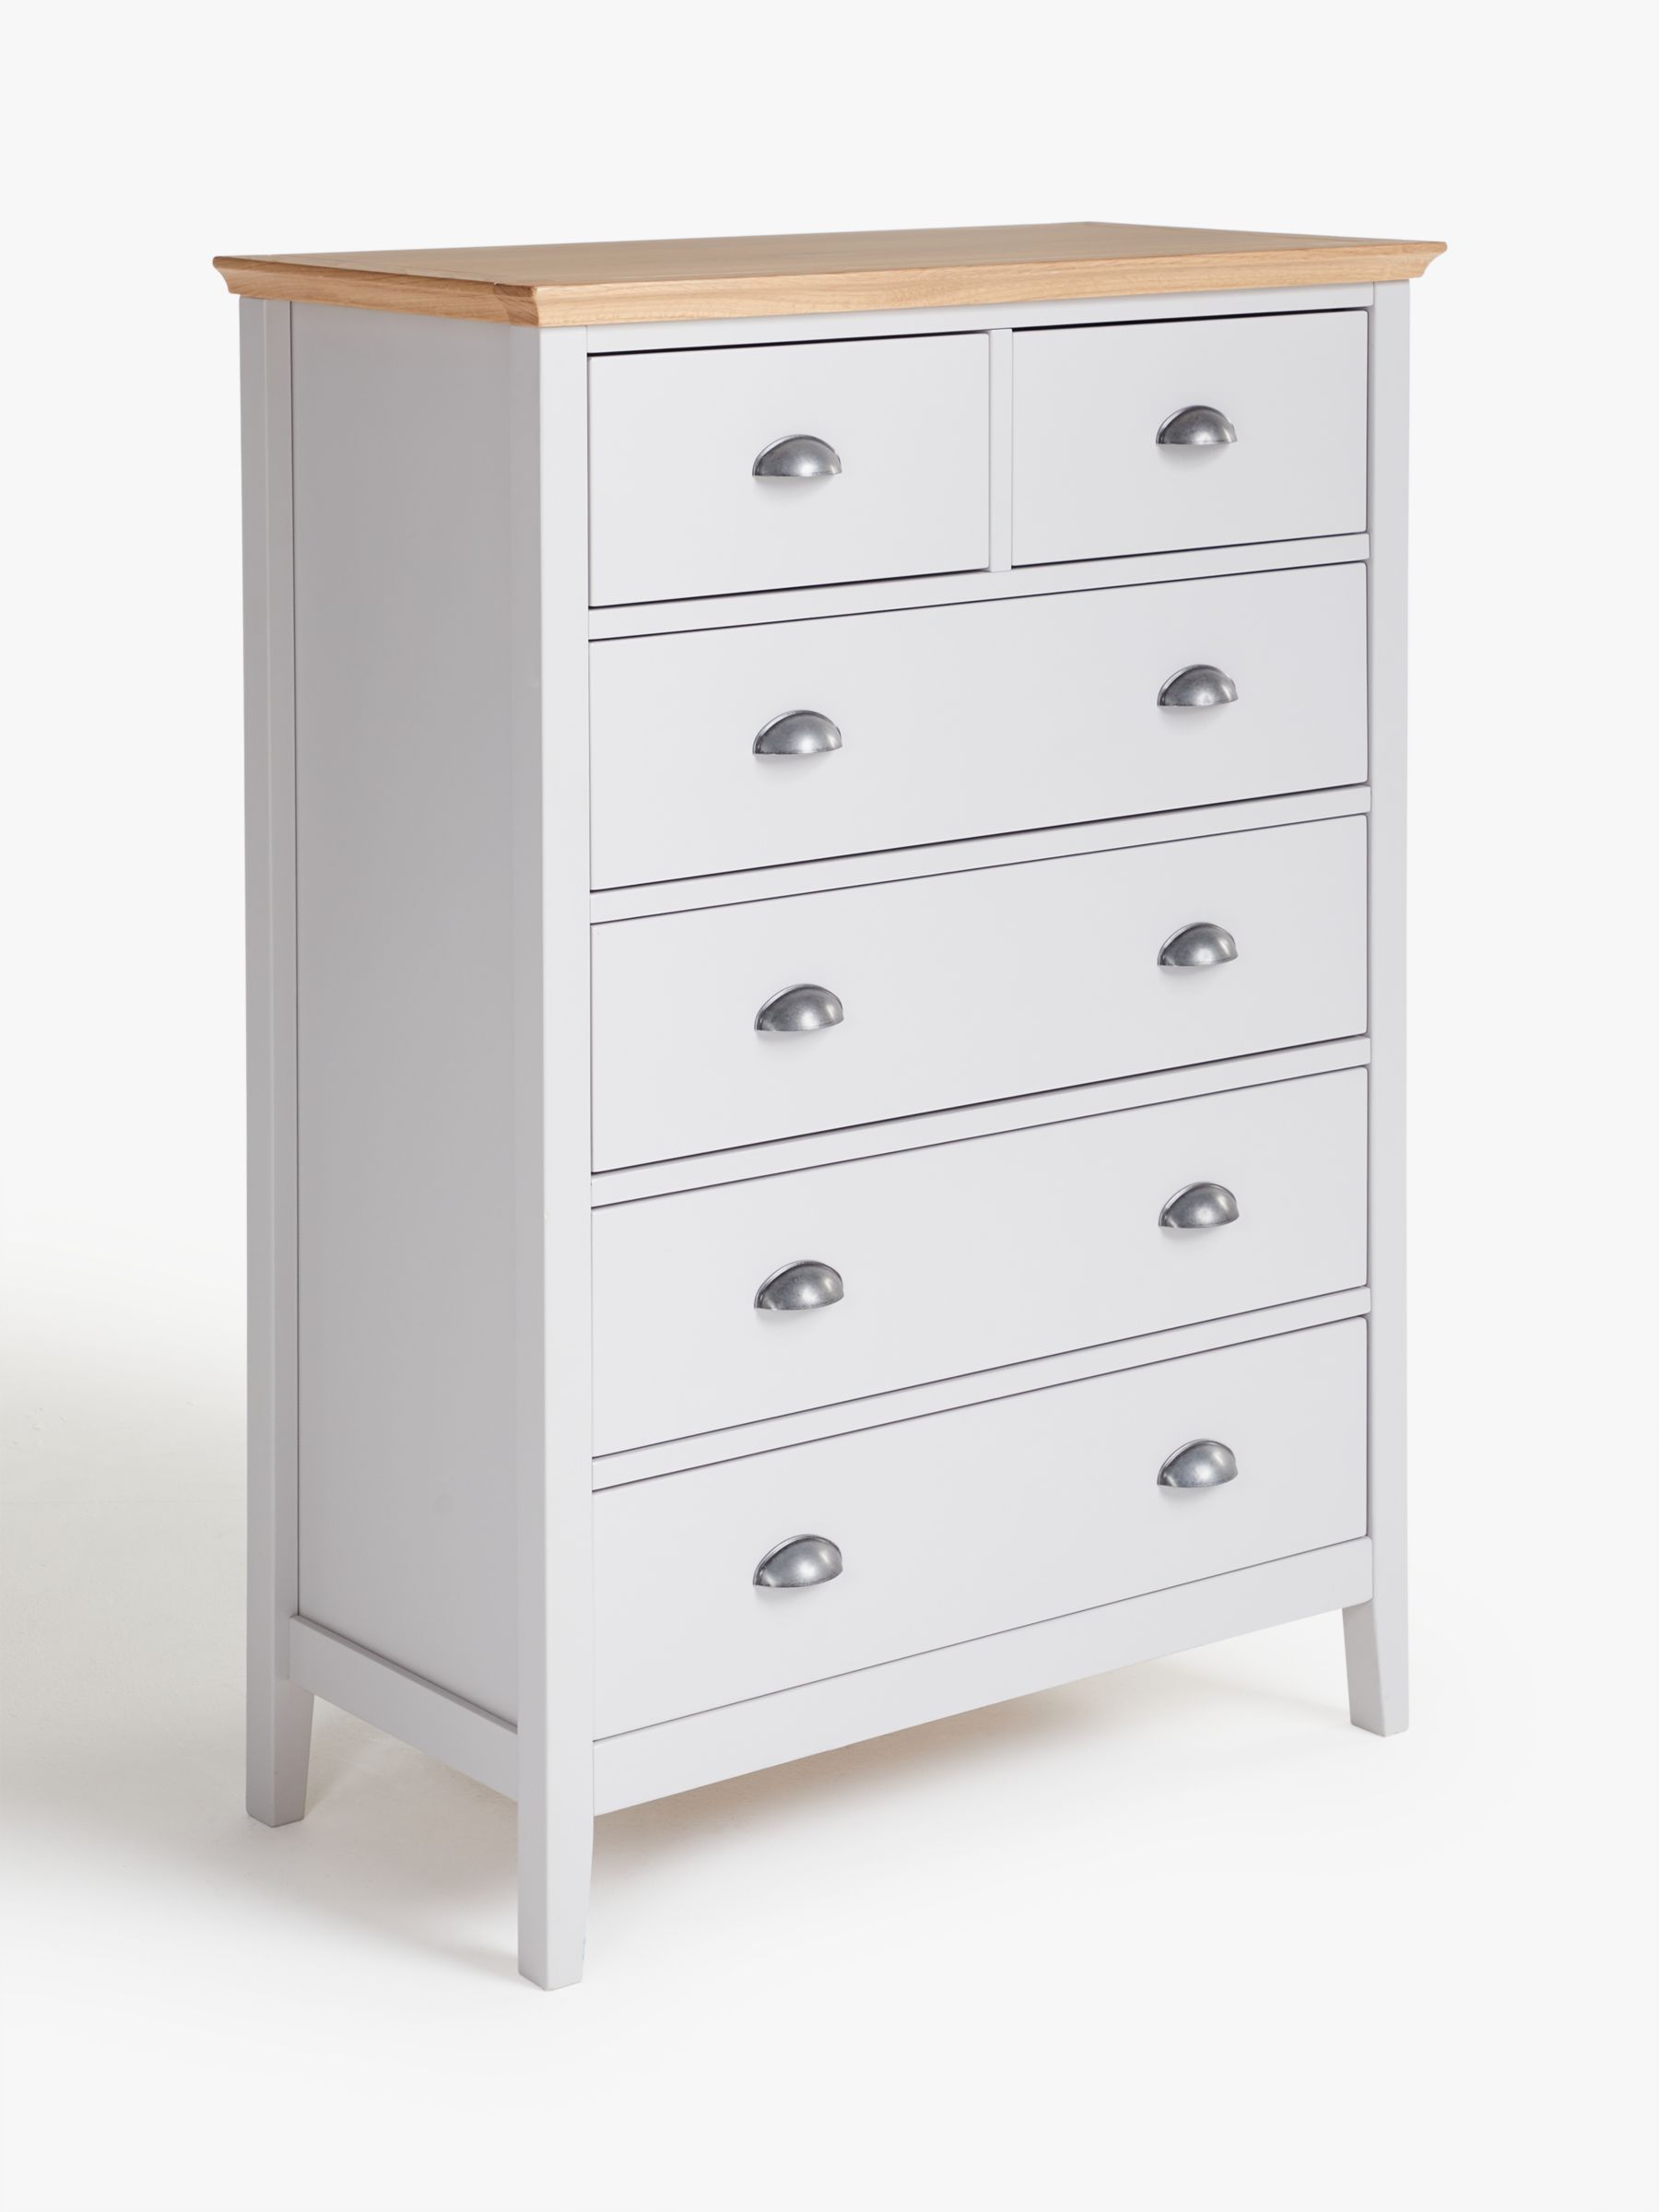 John Lewis Partners Albany 6 Drawer Chest At John Lewis Partners